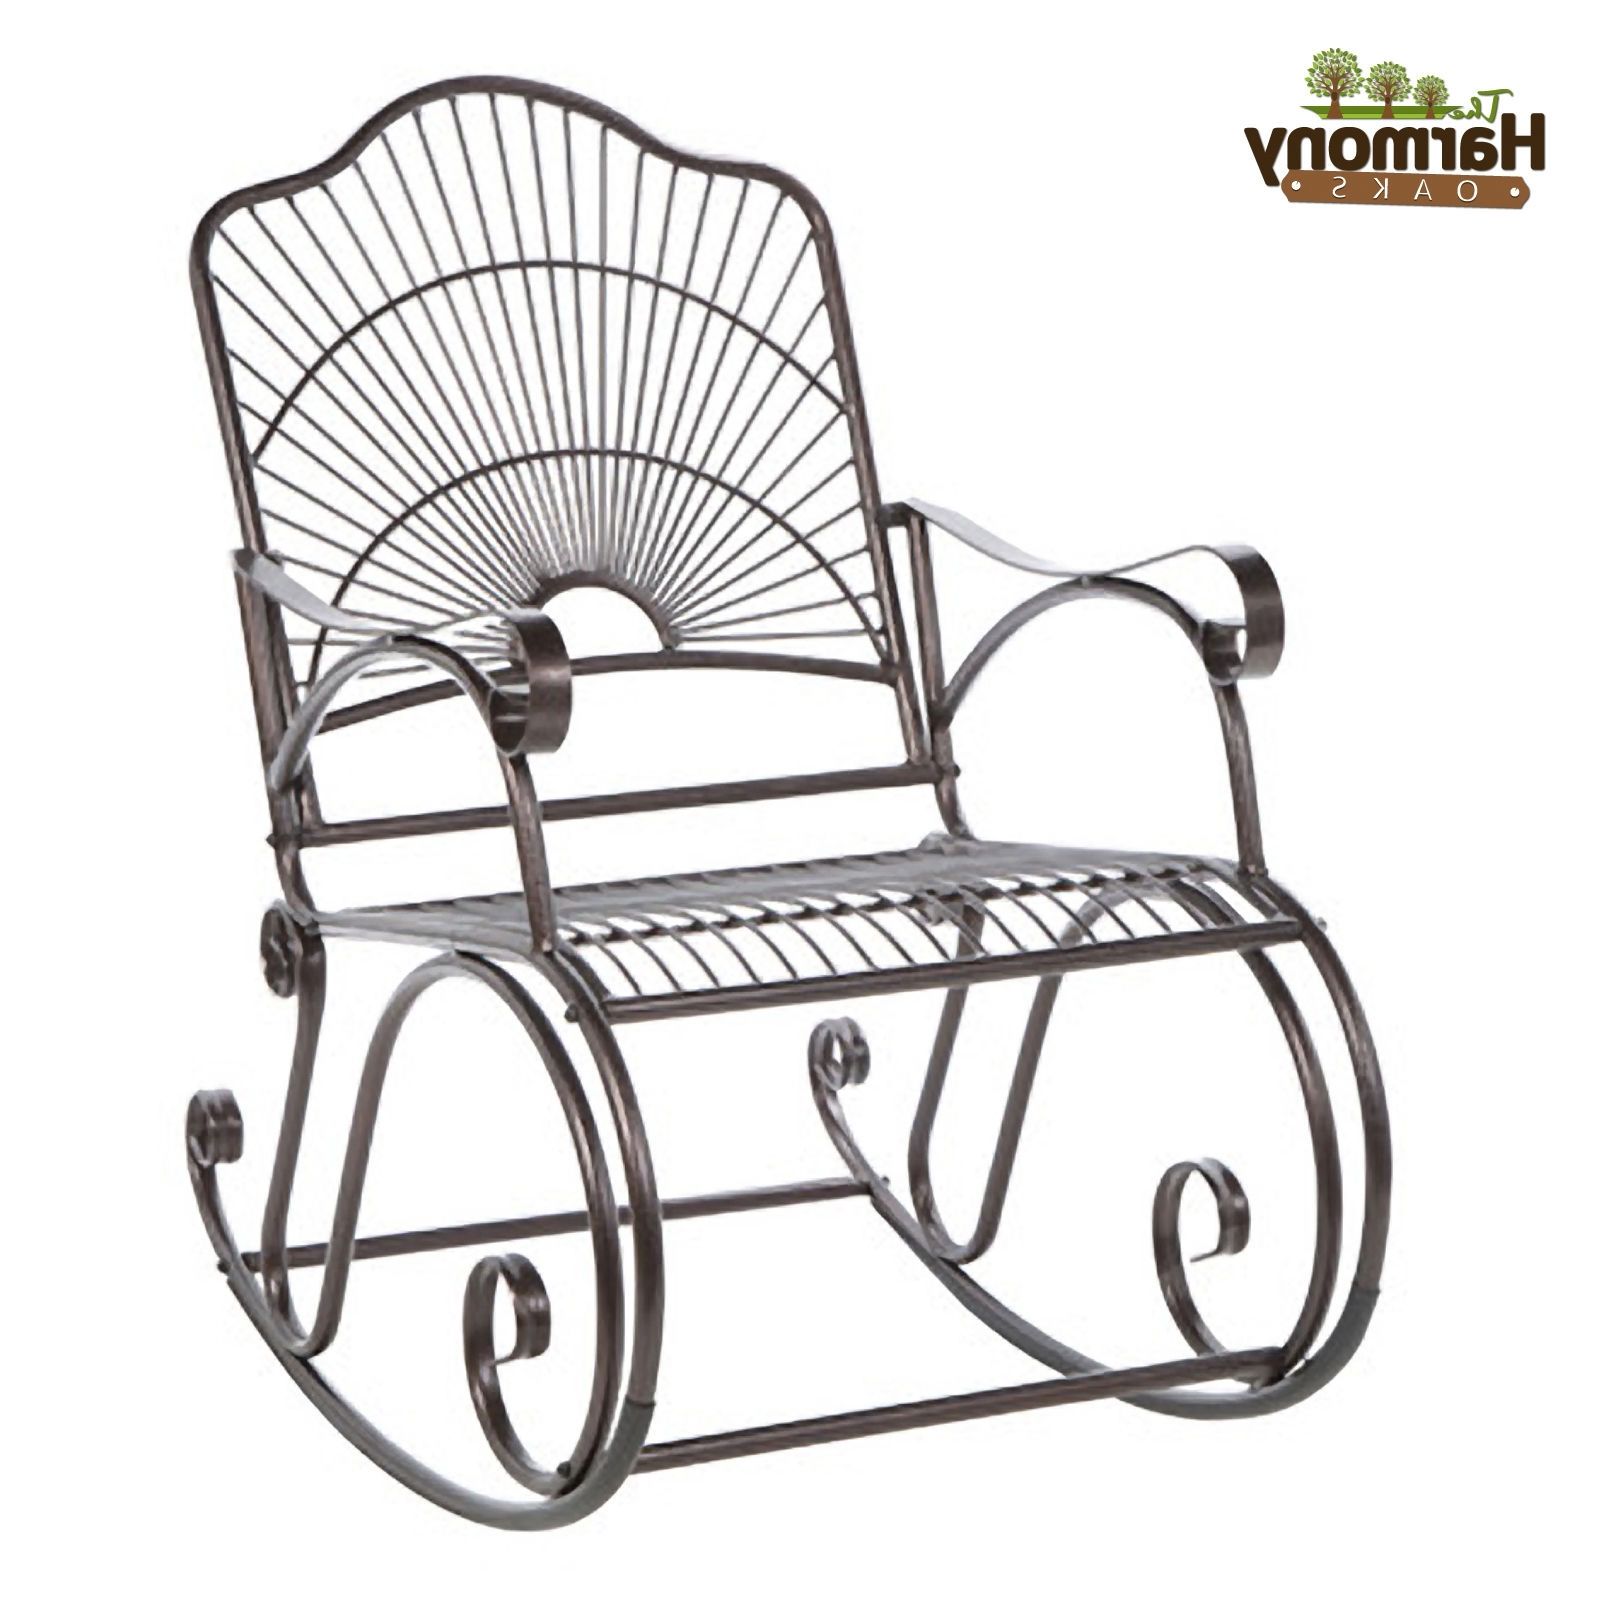 Rocker Wrought Iron Outdoor Patio Porch New Furniture Wrought Iron With Newest Iron Rocking Patio Chairs (View 10 of 15)